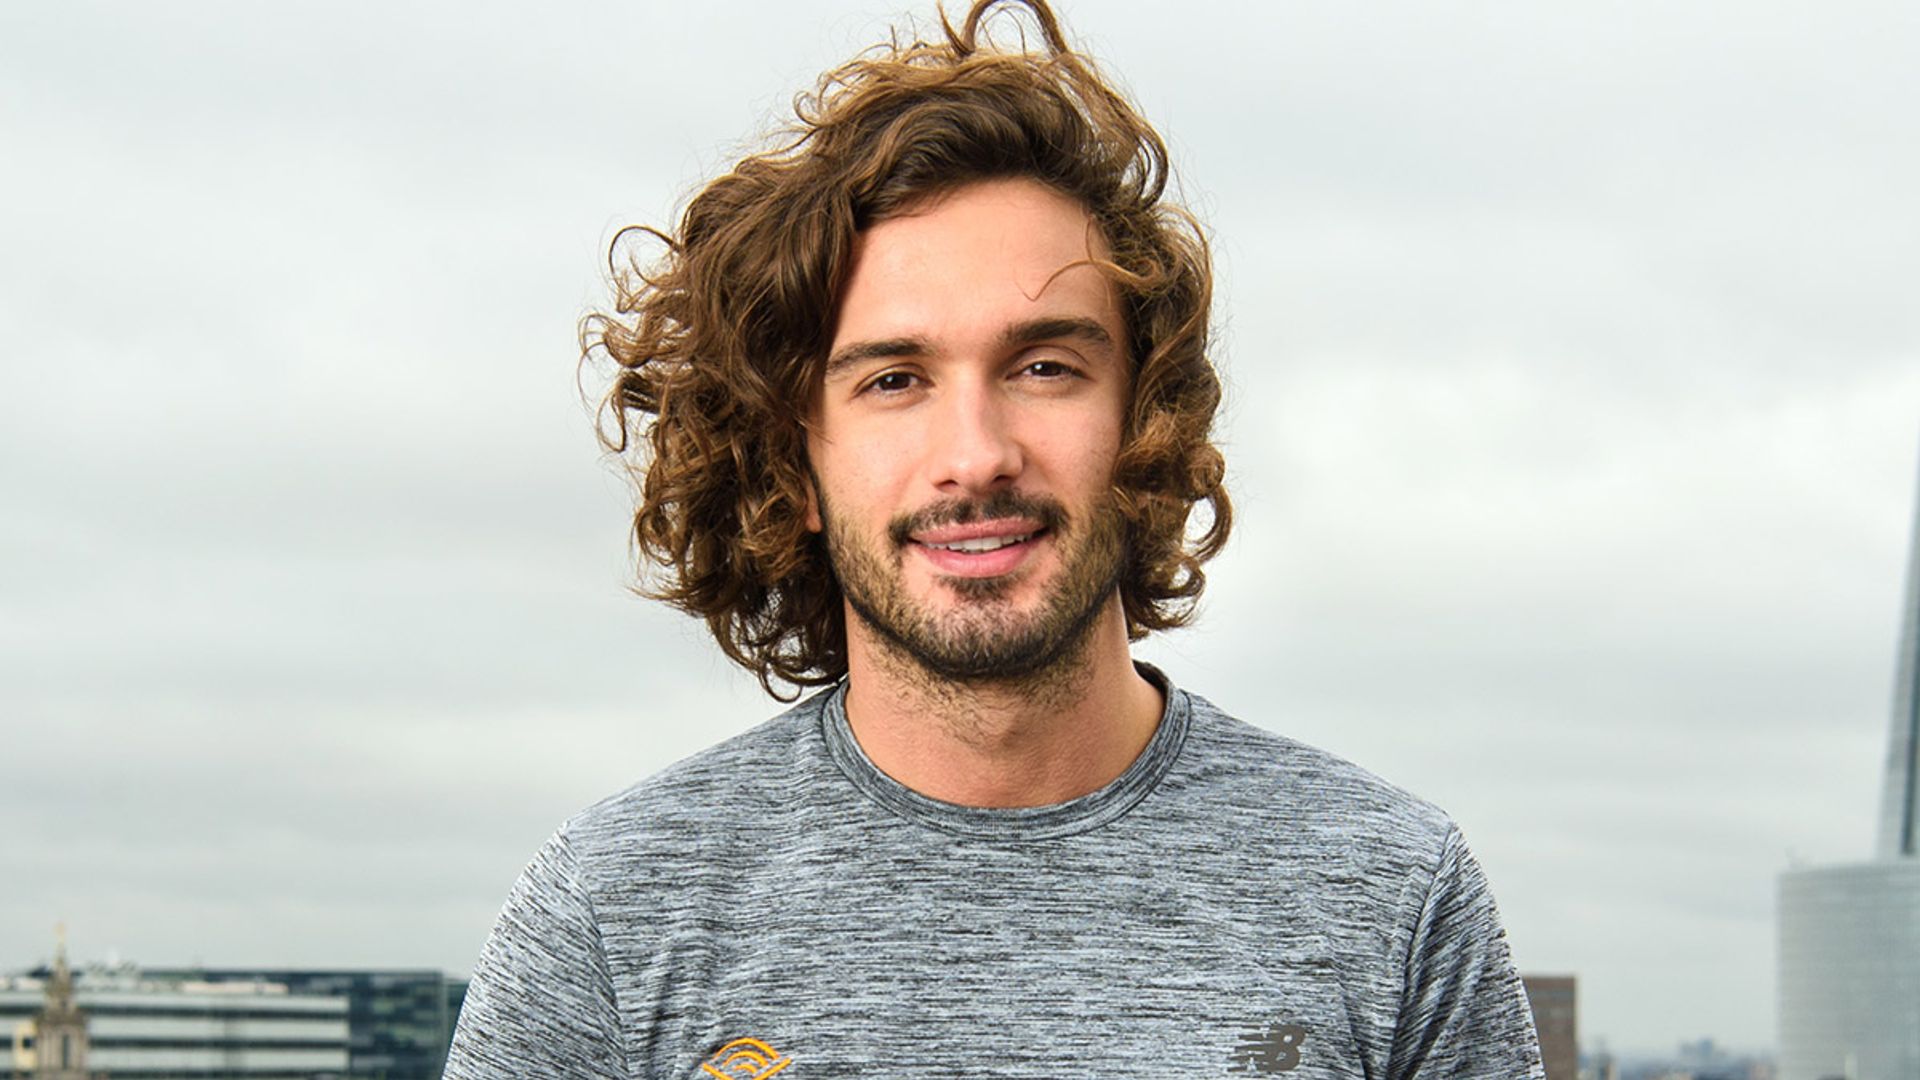 Joe Wicks reveals how to tone up for your summer holiday (and how to stay motivated)